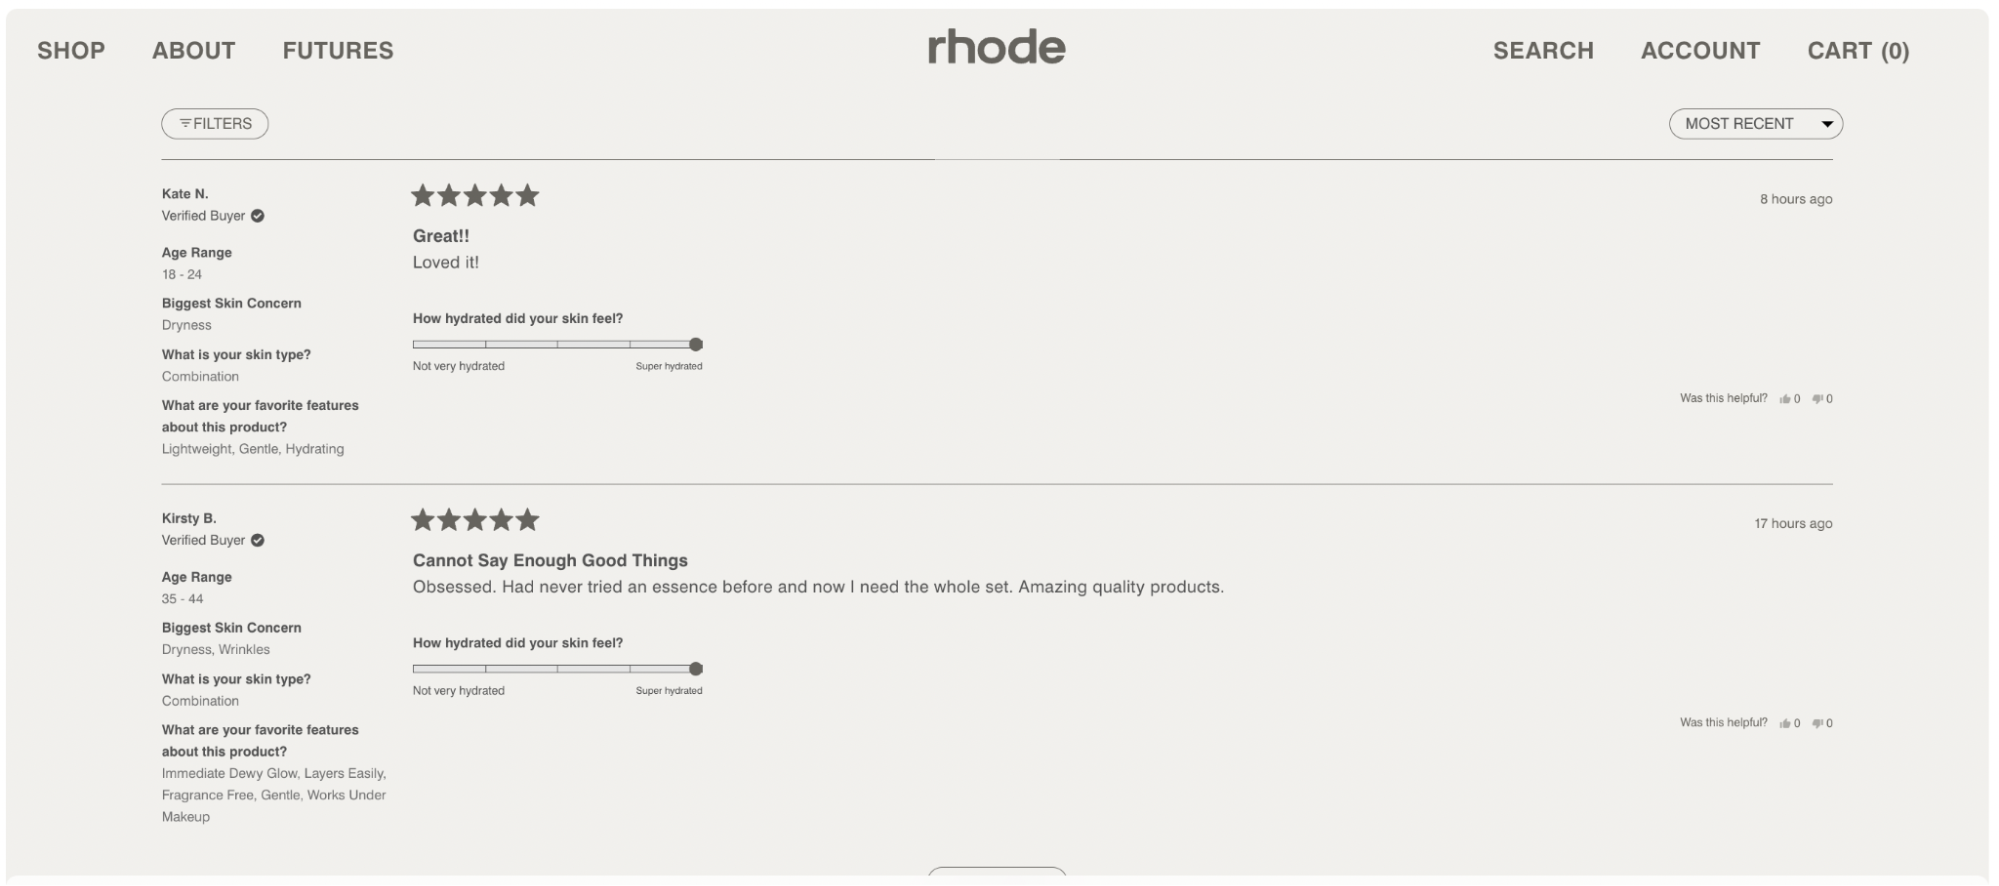 Rhode skin care’s reviews page, including ratings, comments, and filtering options.